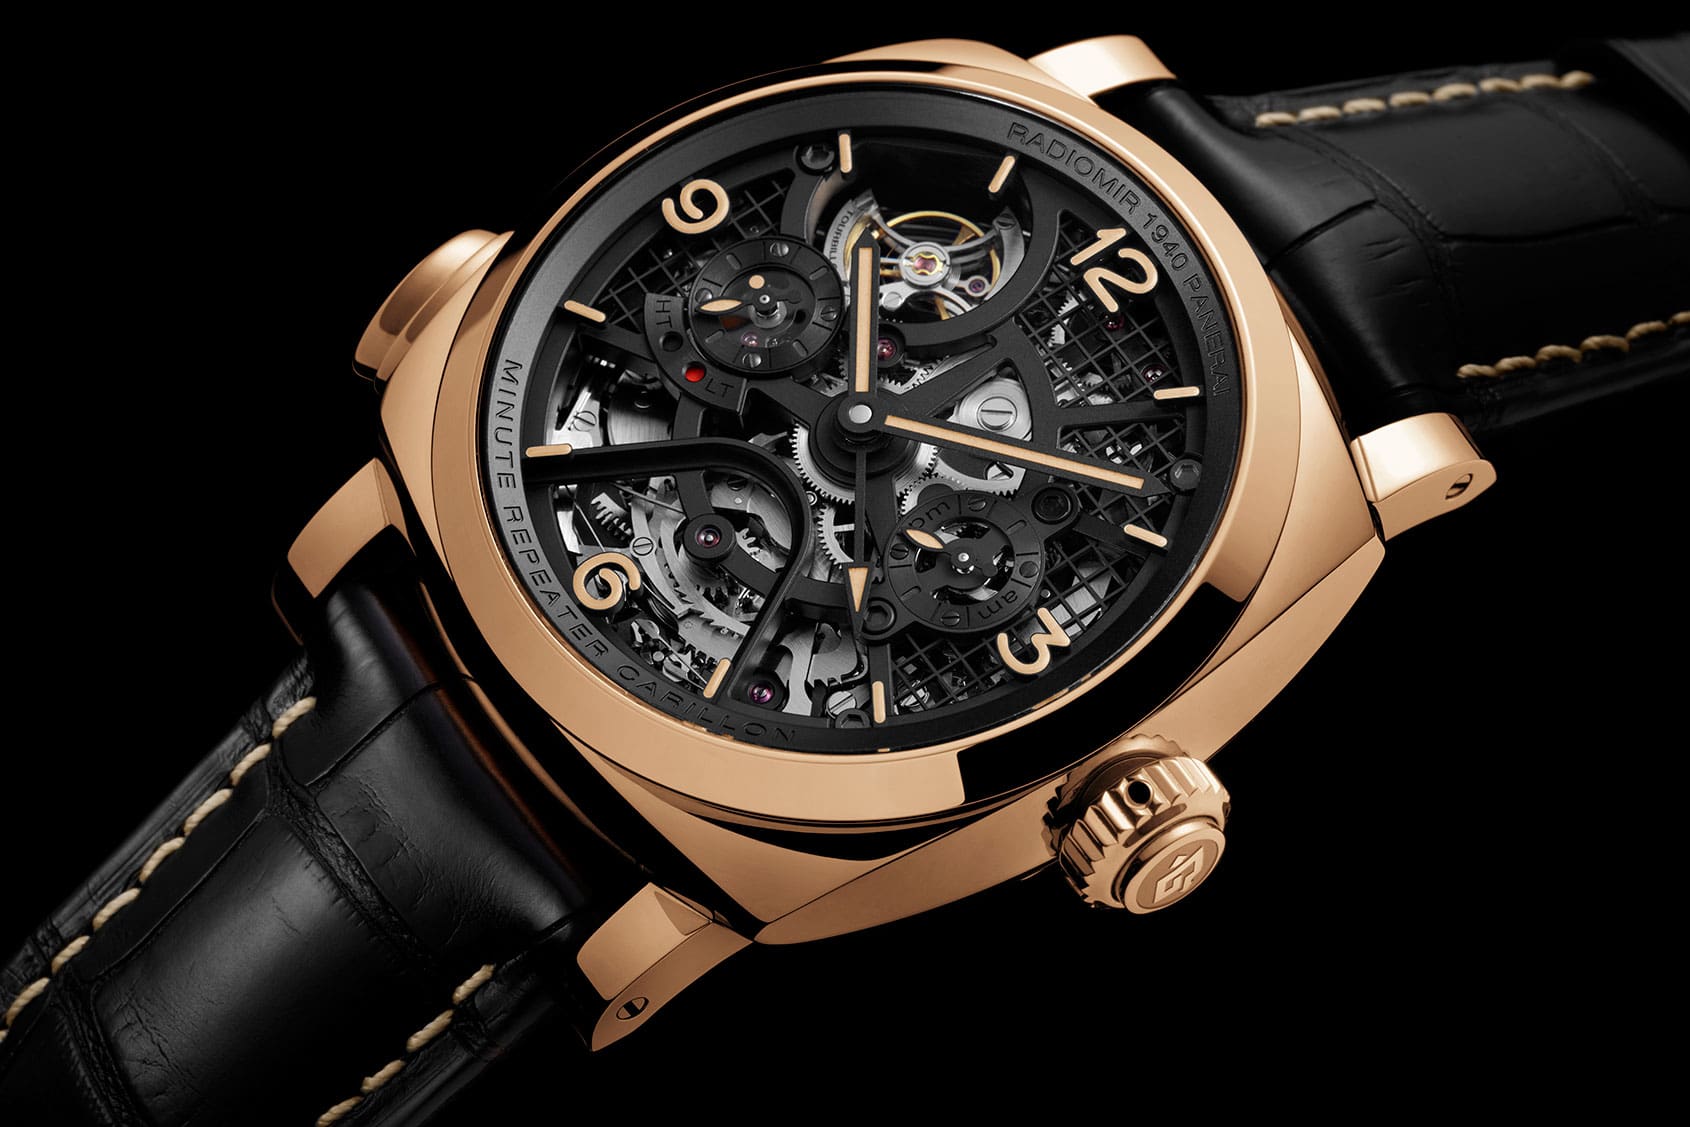 INTRODUCING: For whom the bell tolls, the Panerai Radiomir 1940 Minute Repeater Carillon